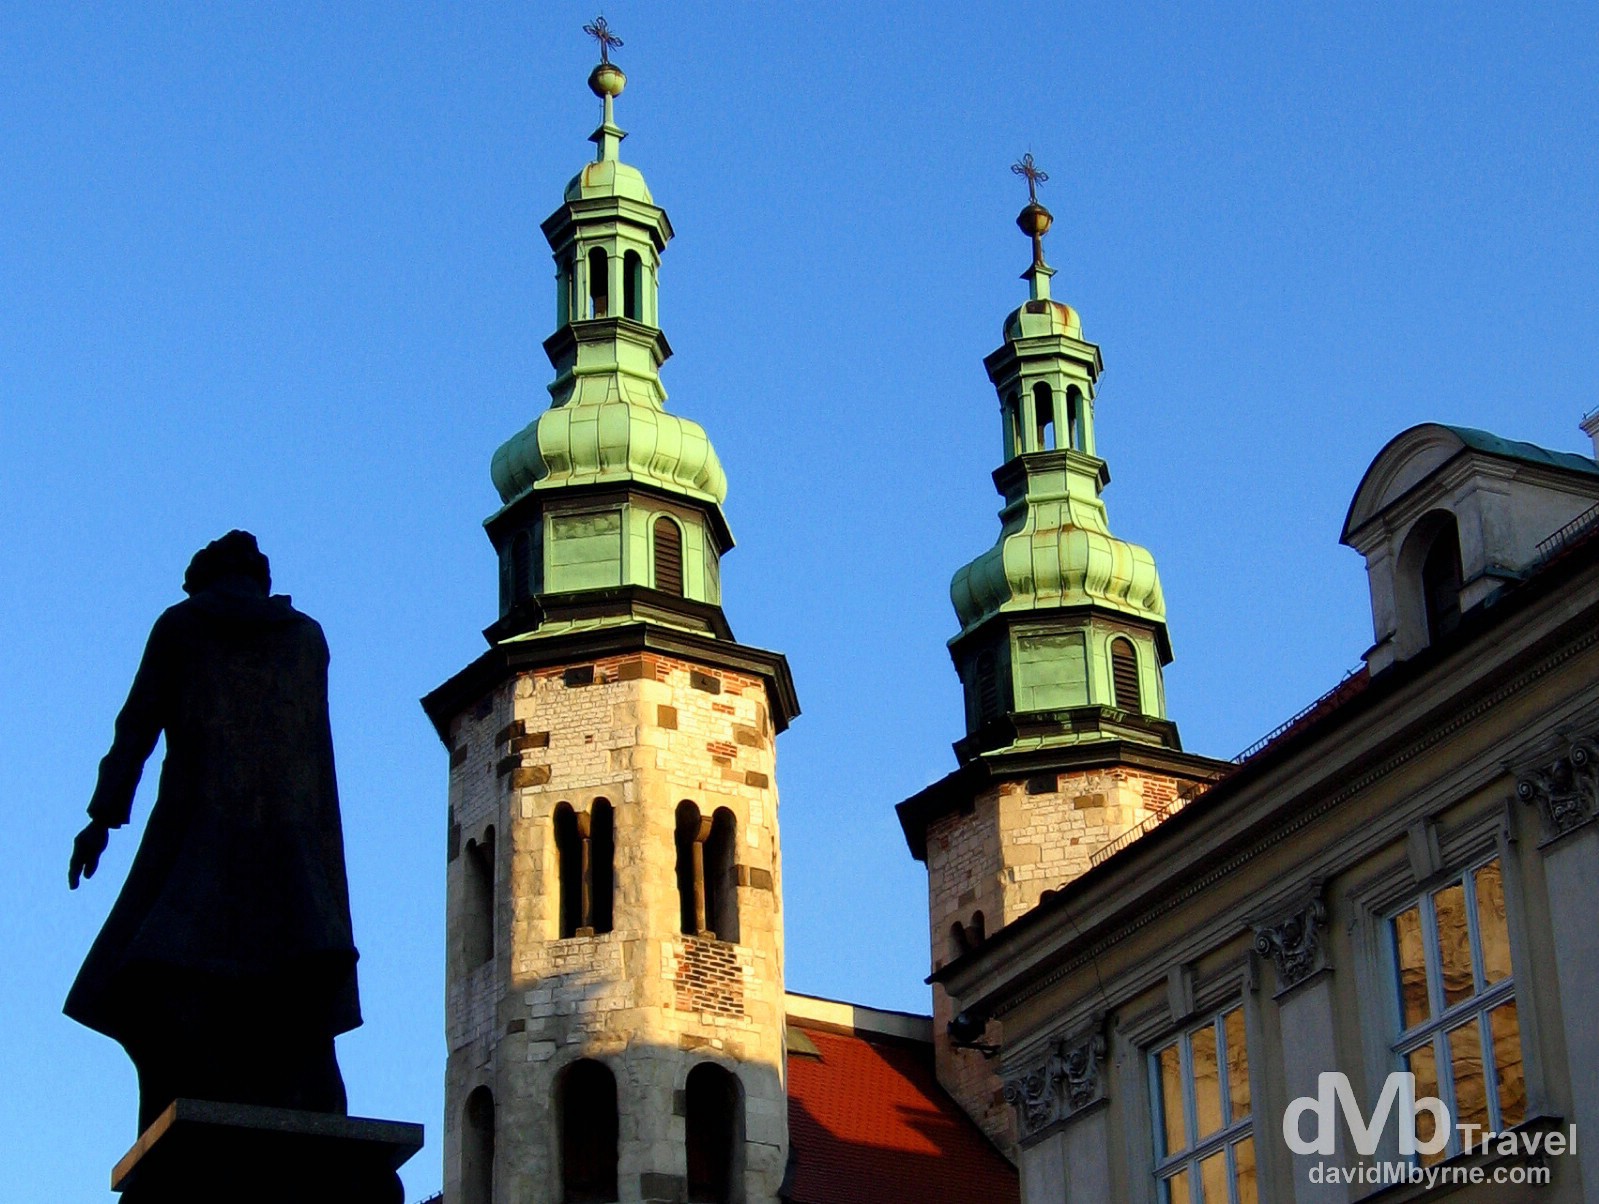 The silhouette of a statue & twin spires of Saint Andrew's Church in Old Town, Krakow, Poland. March 6, 2006.